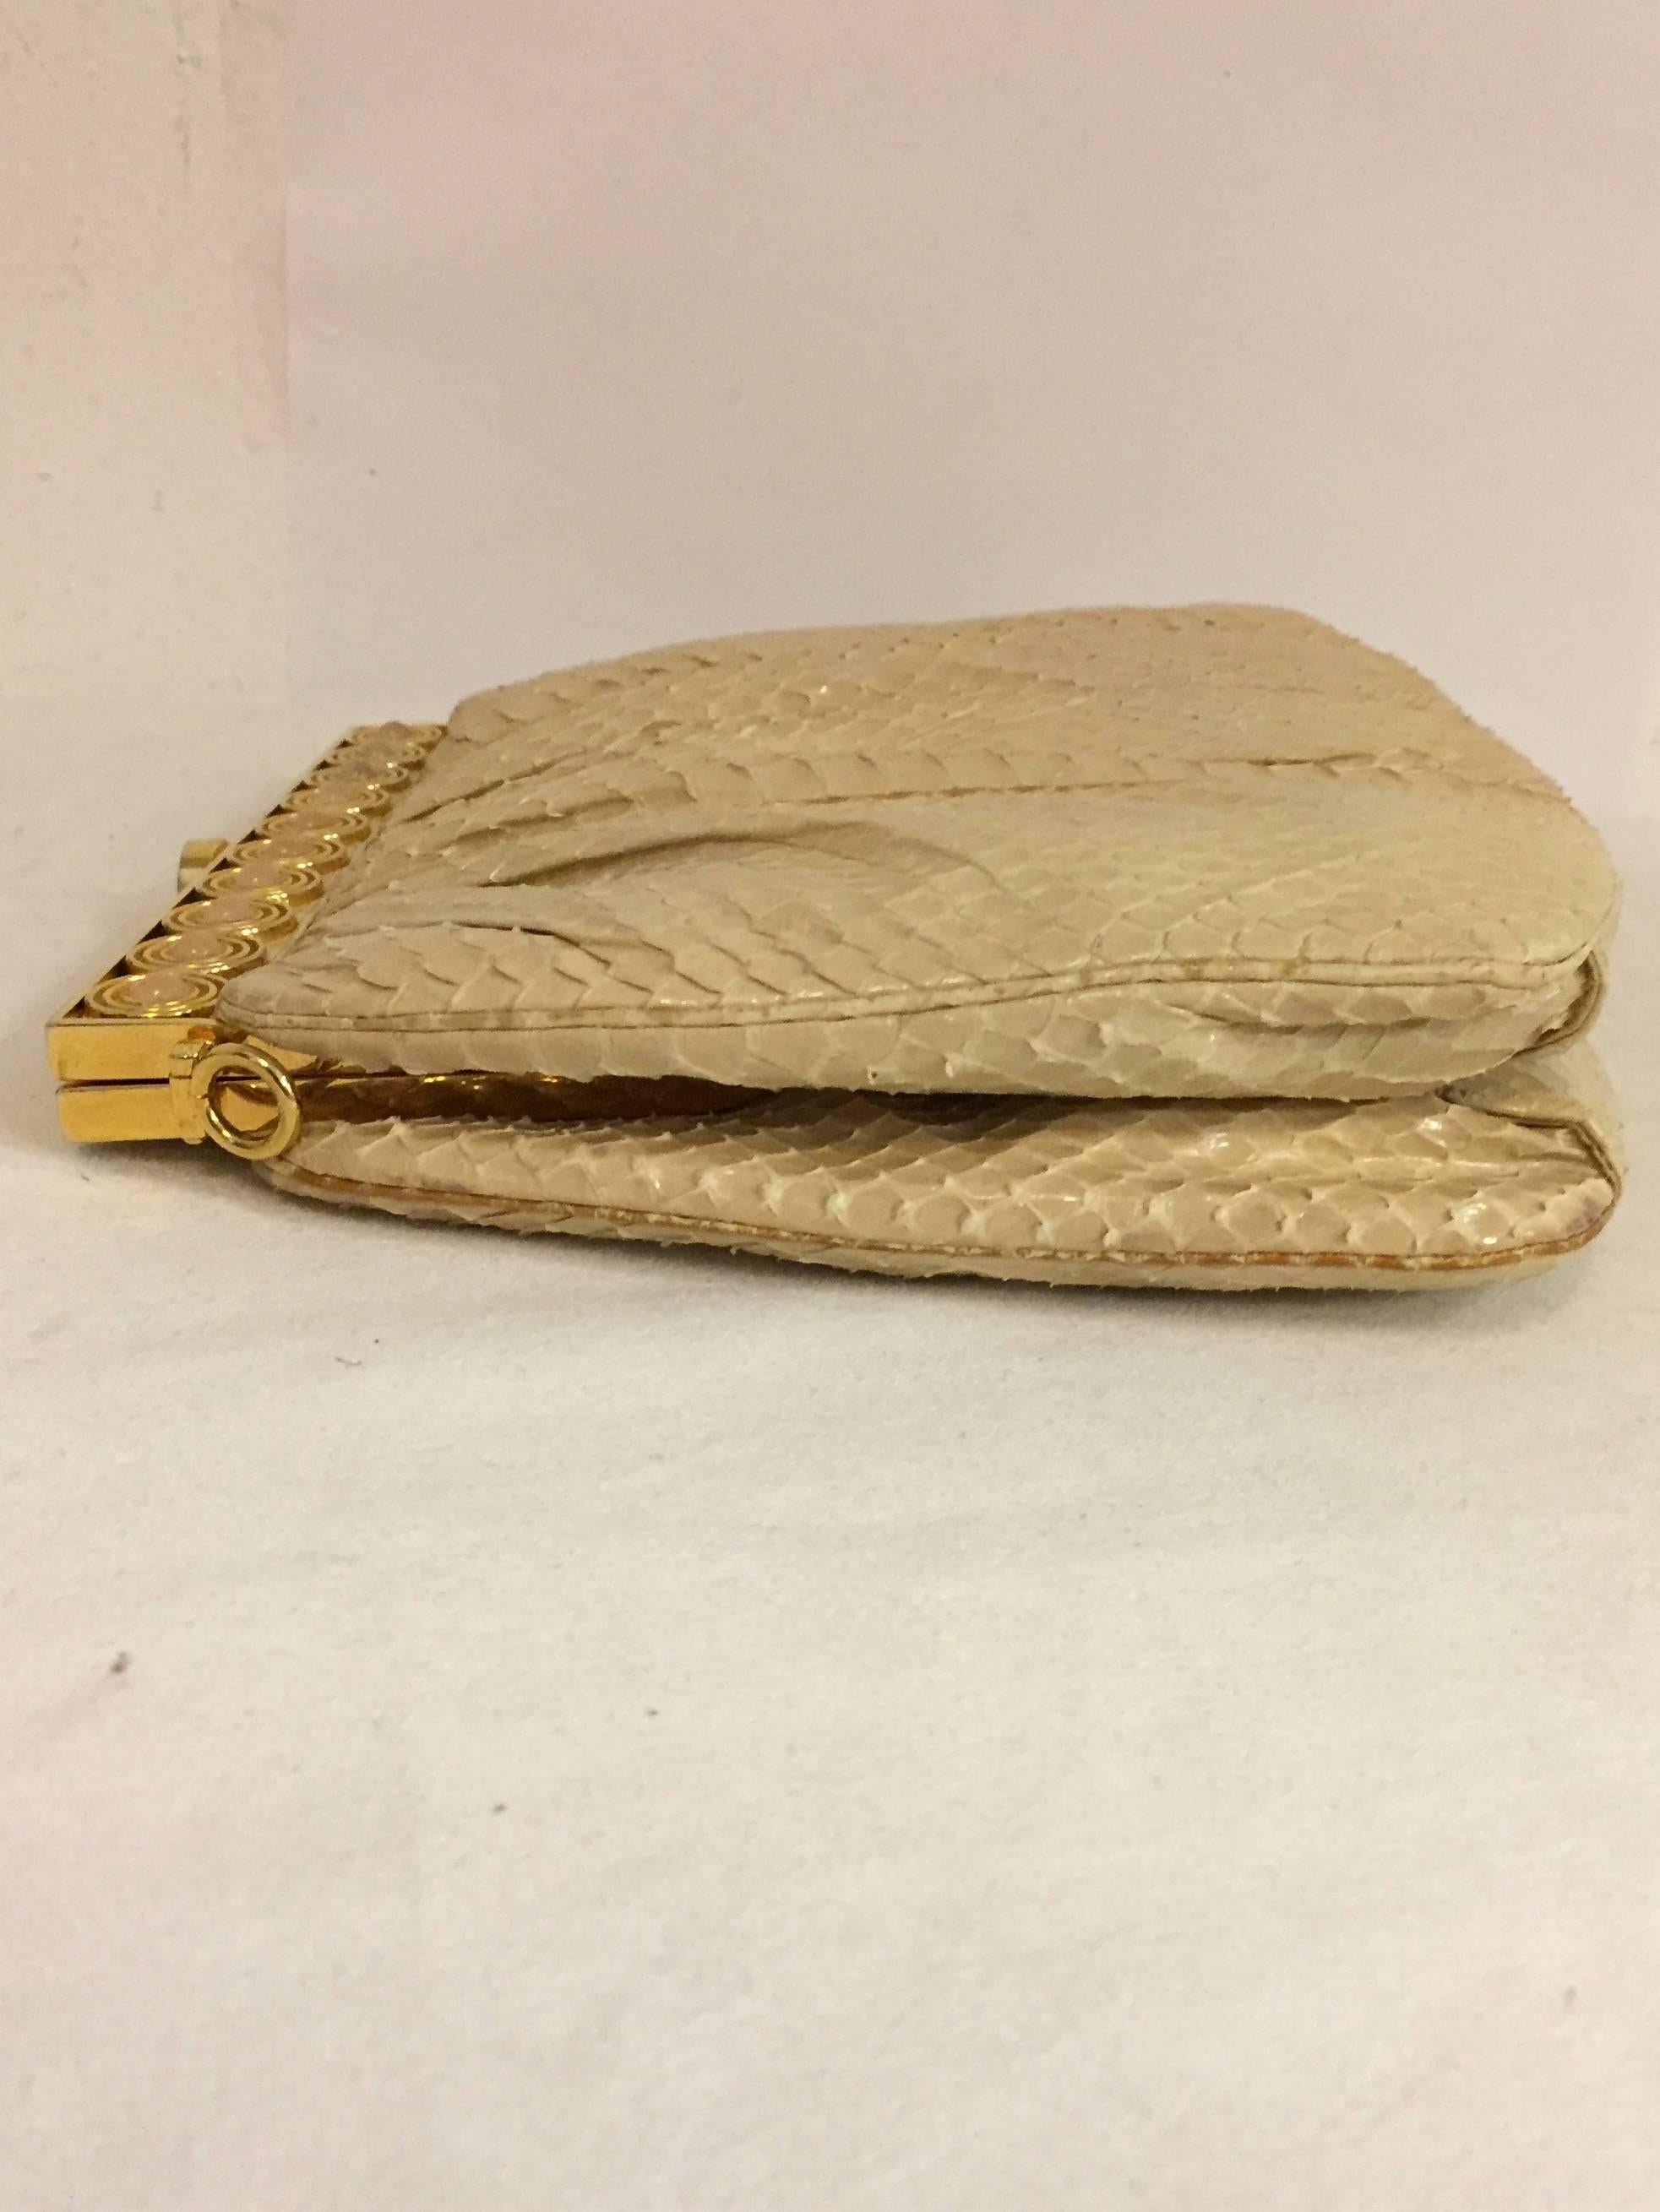 Stylish pleated cream colored skin, tonal stitching with gold tone hardware at closure.   The snakeskin strap is also cream color and can be removed.  Beautifully constructed in 1986 in the authentic Judith Leiber fashion.  The inside has one